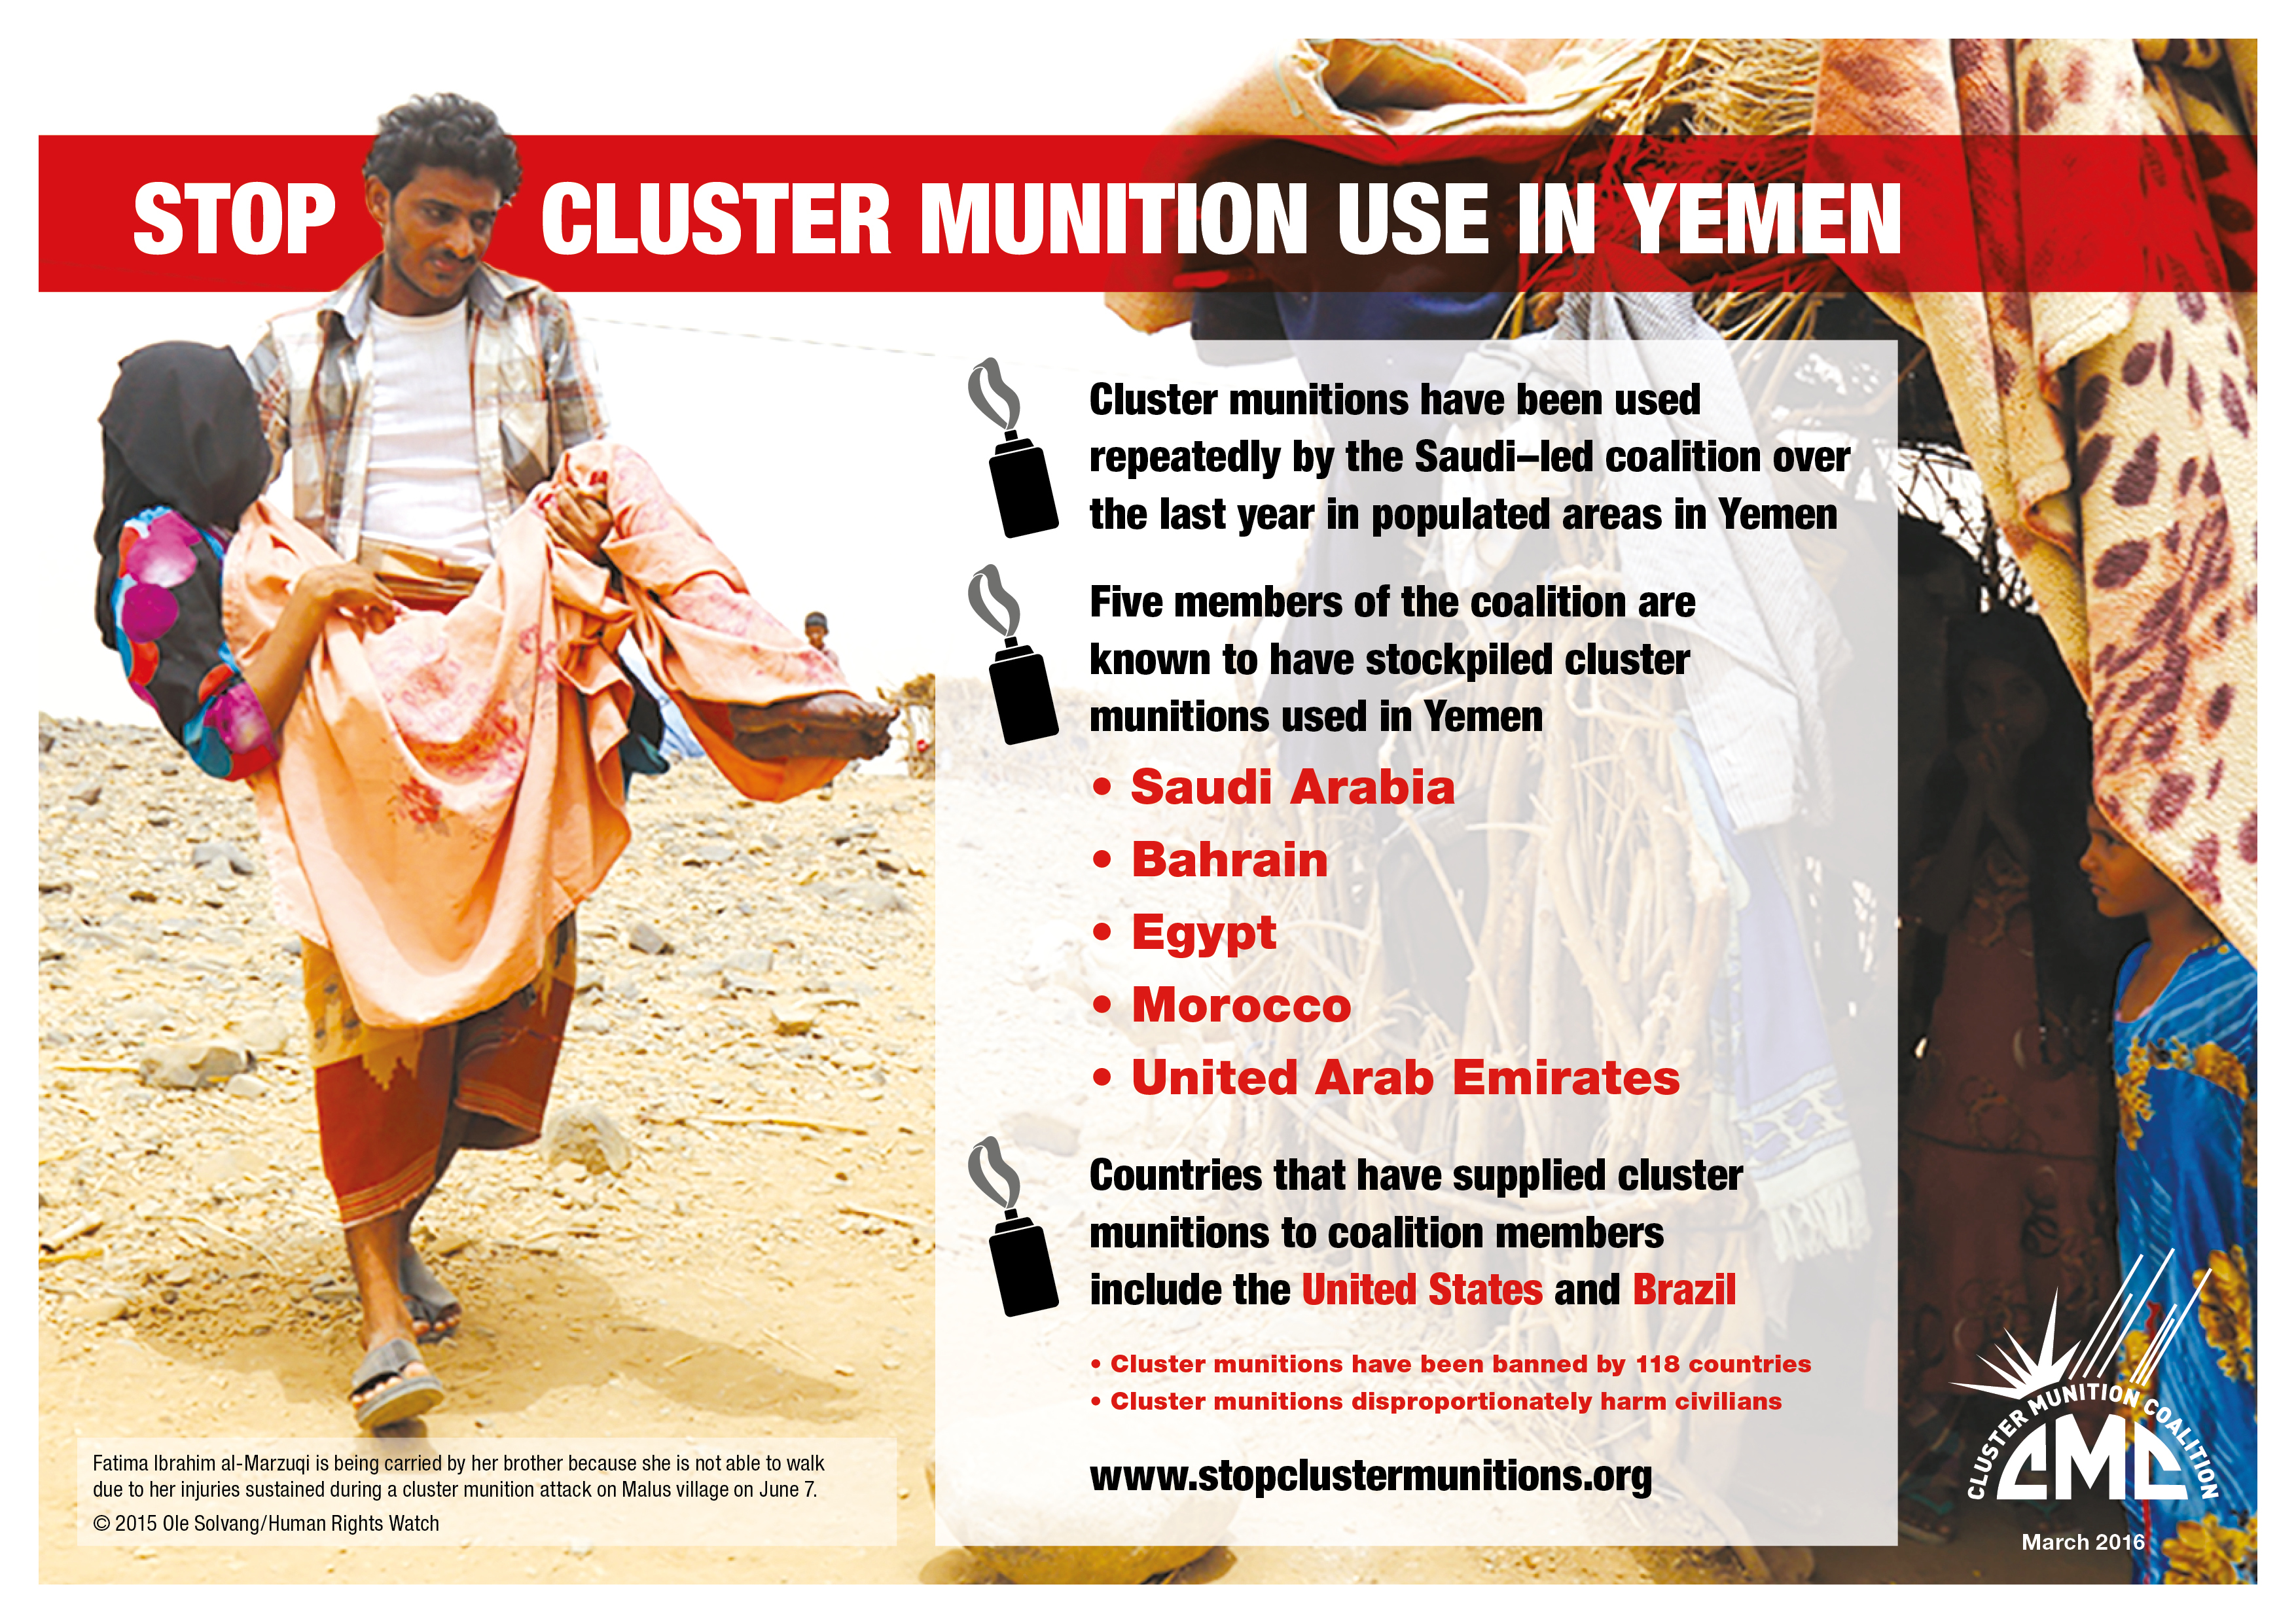 Cluster-munition-use_Infographic_March-2016_-jpg-.jpg